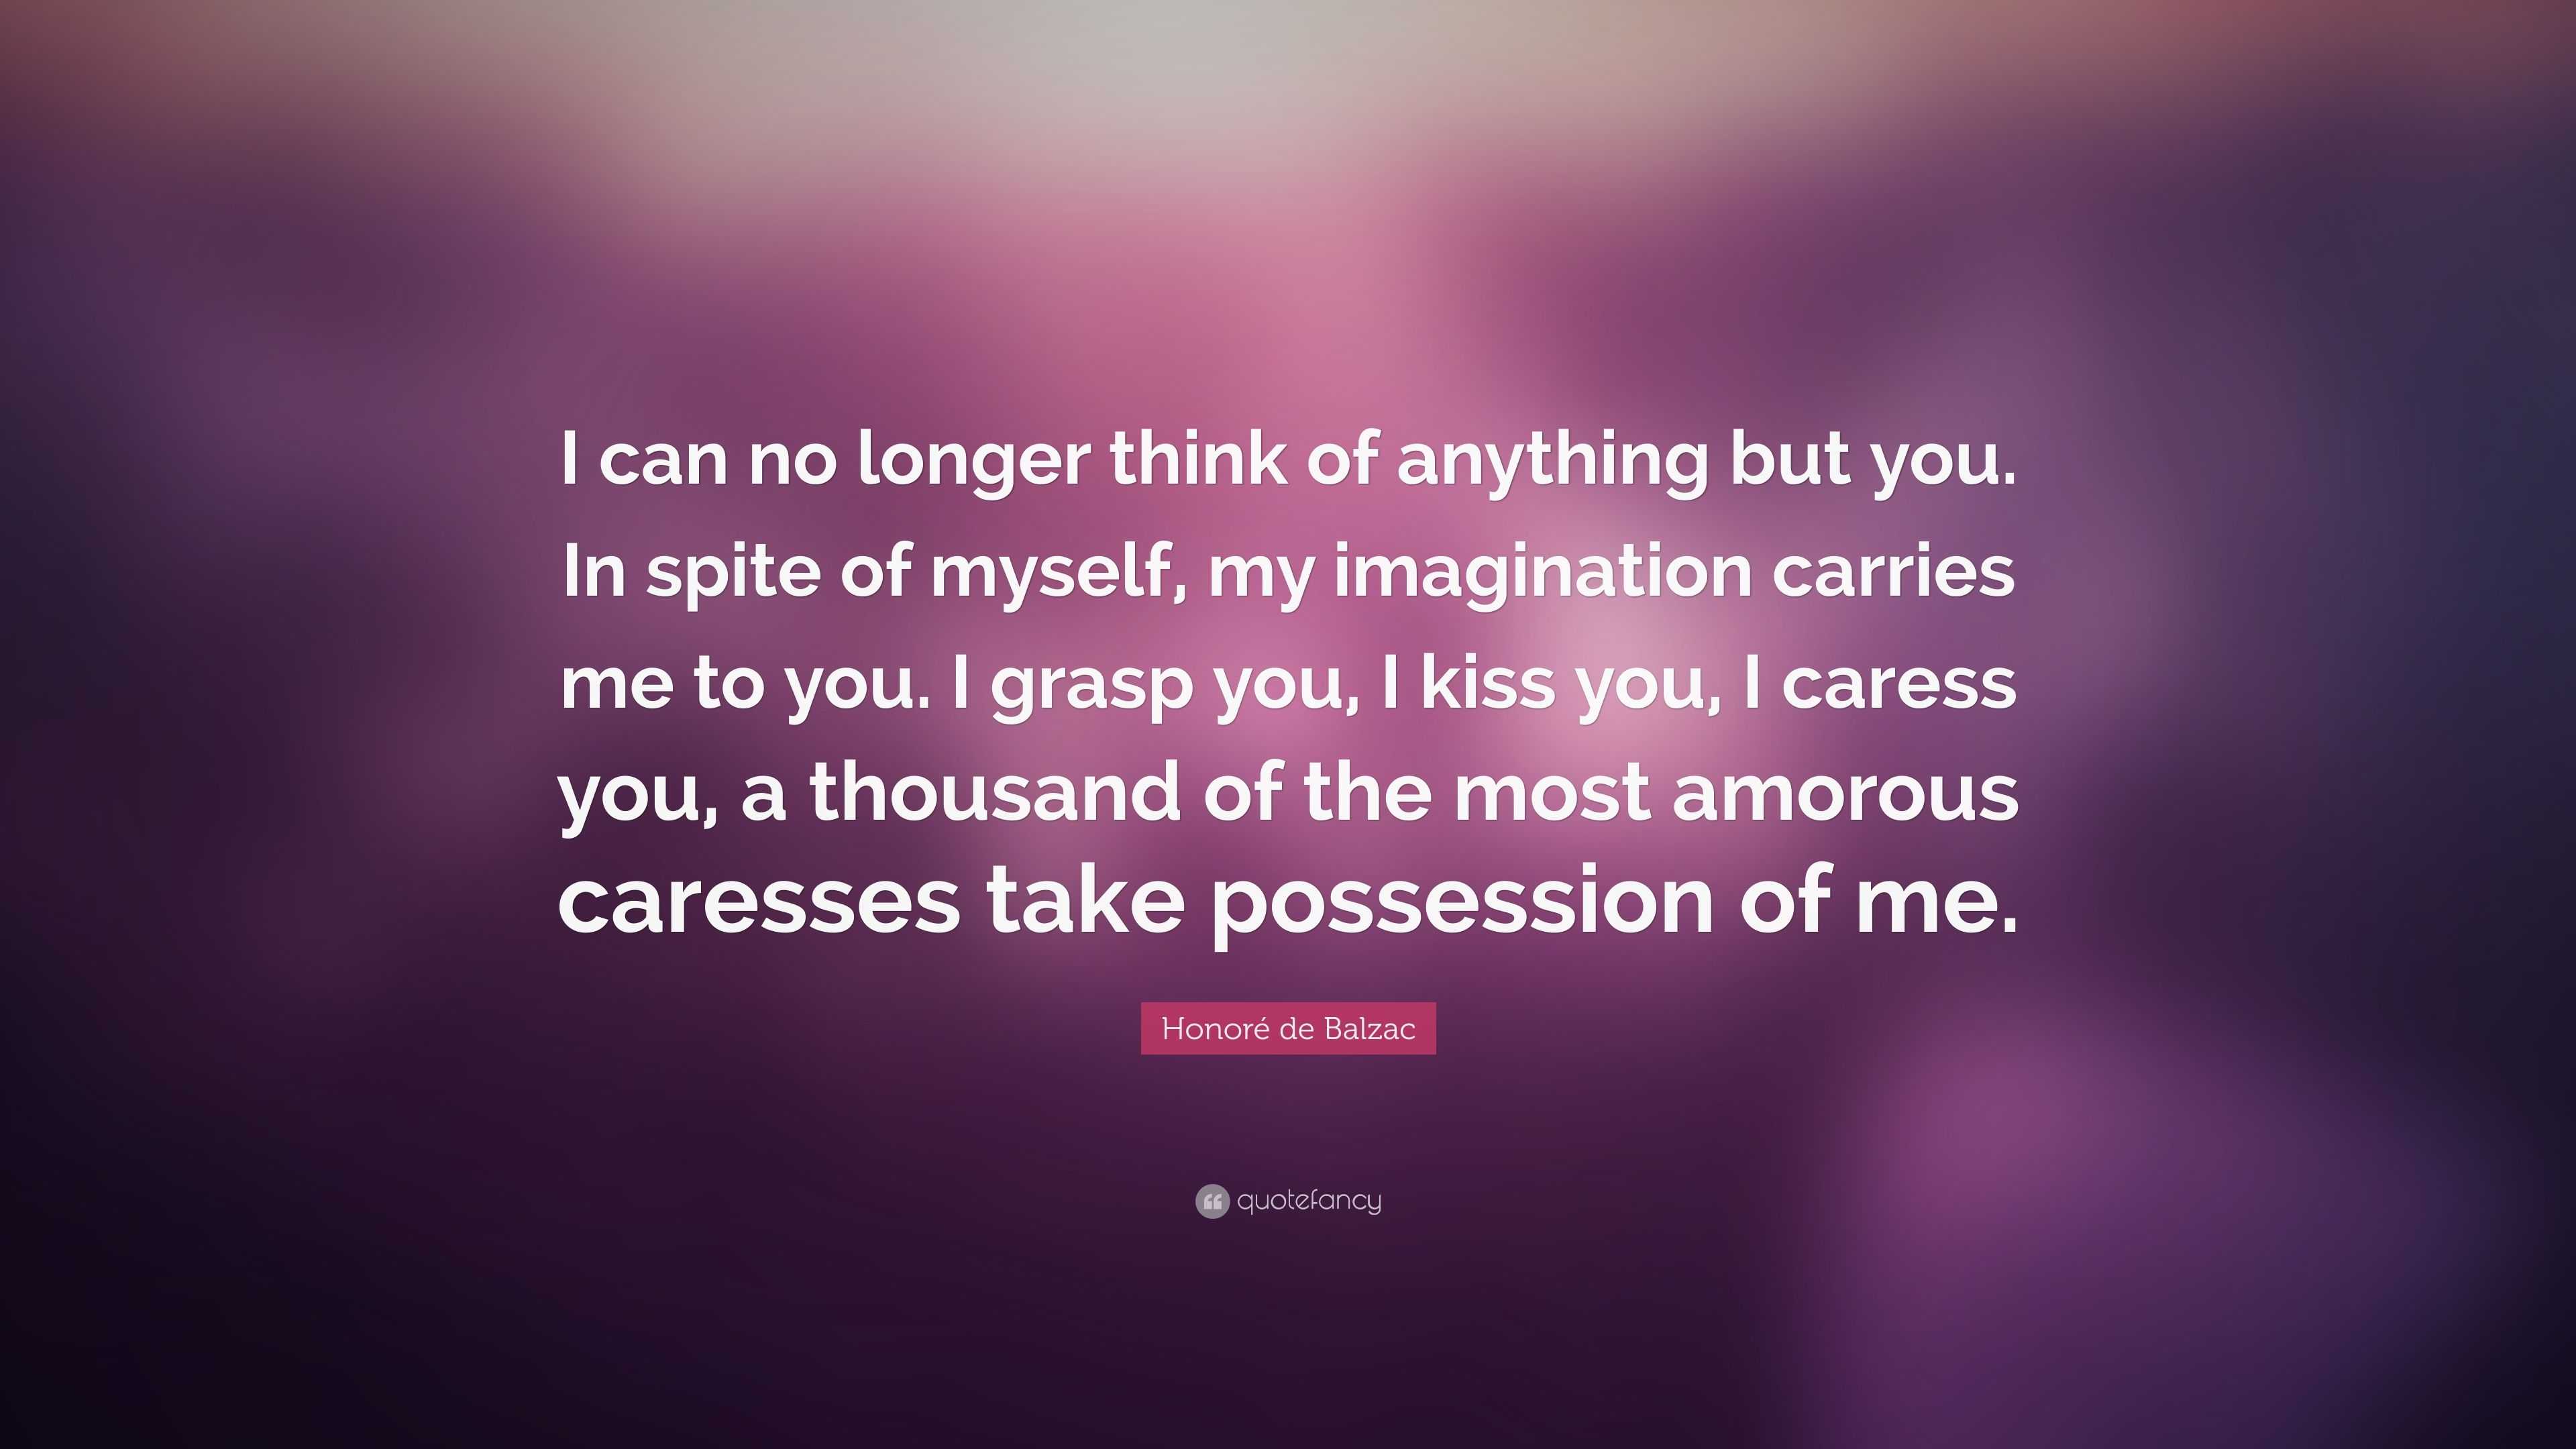 Honoré de Balzac Quote: “I can no longer think of anything but you. In ...